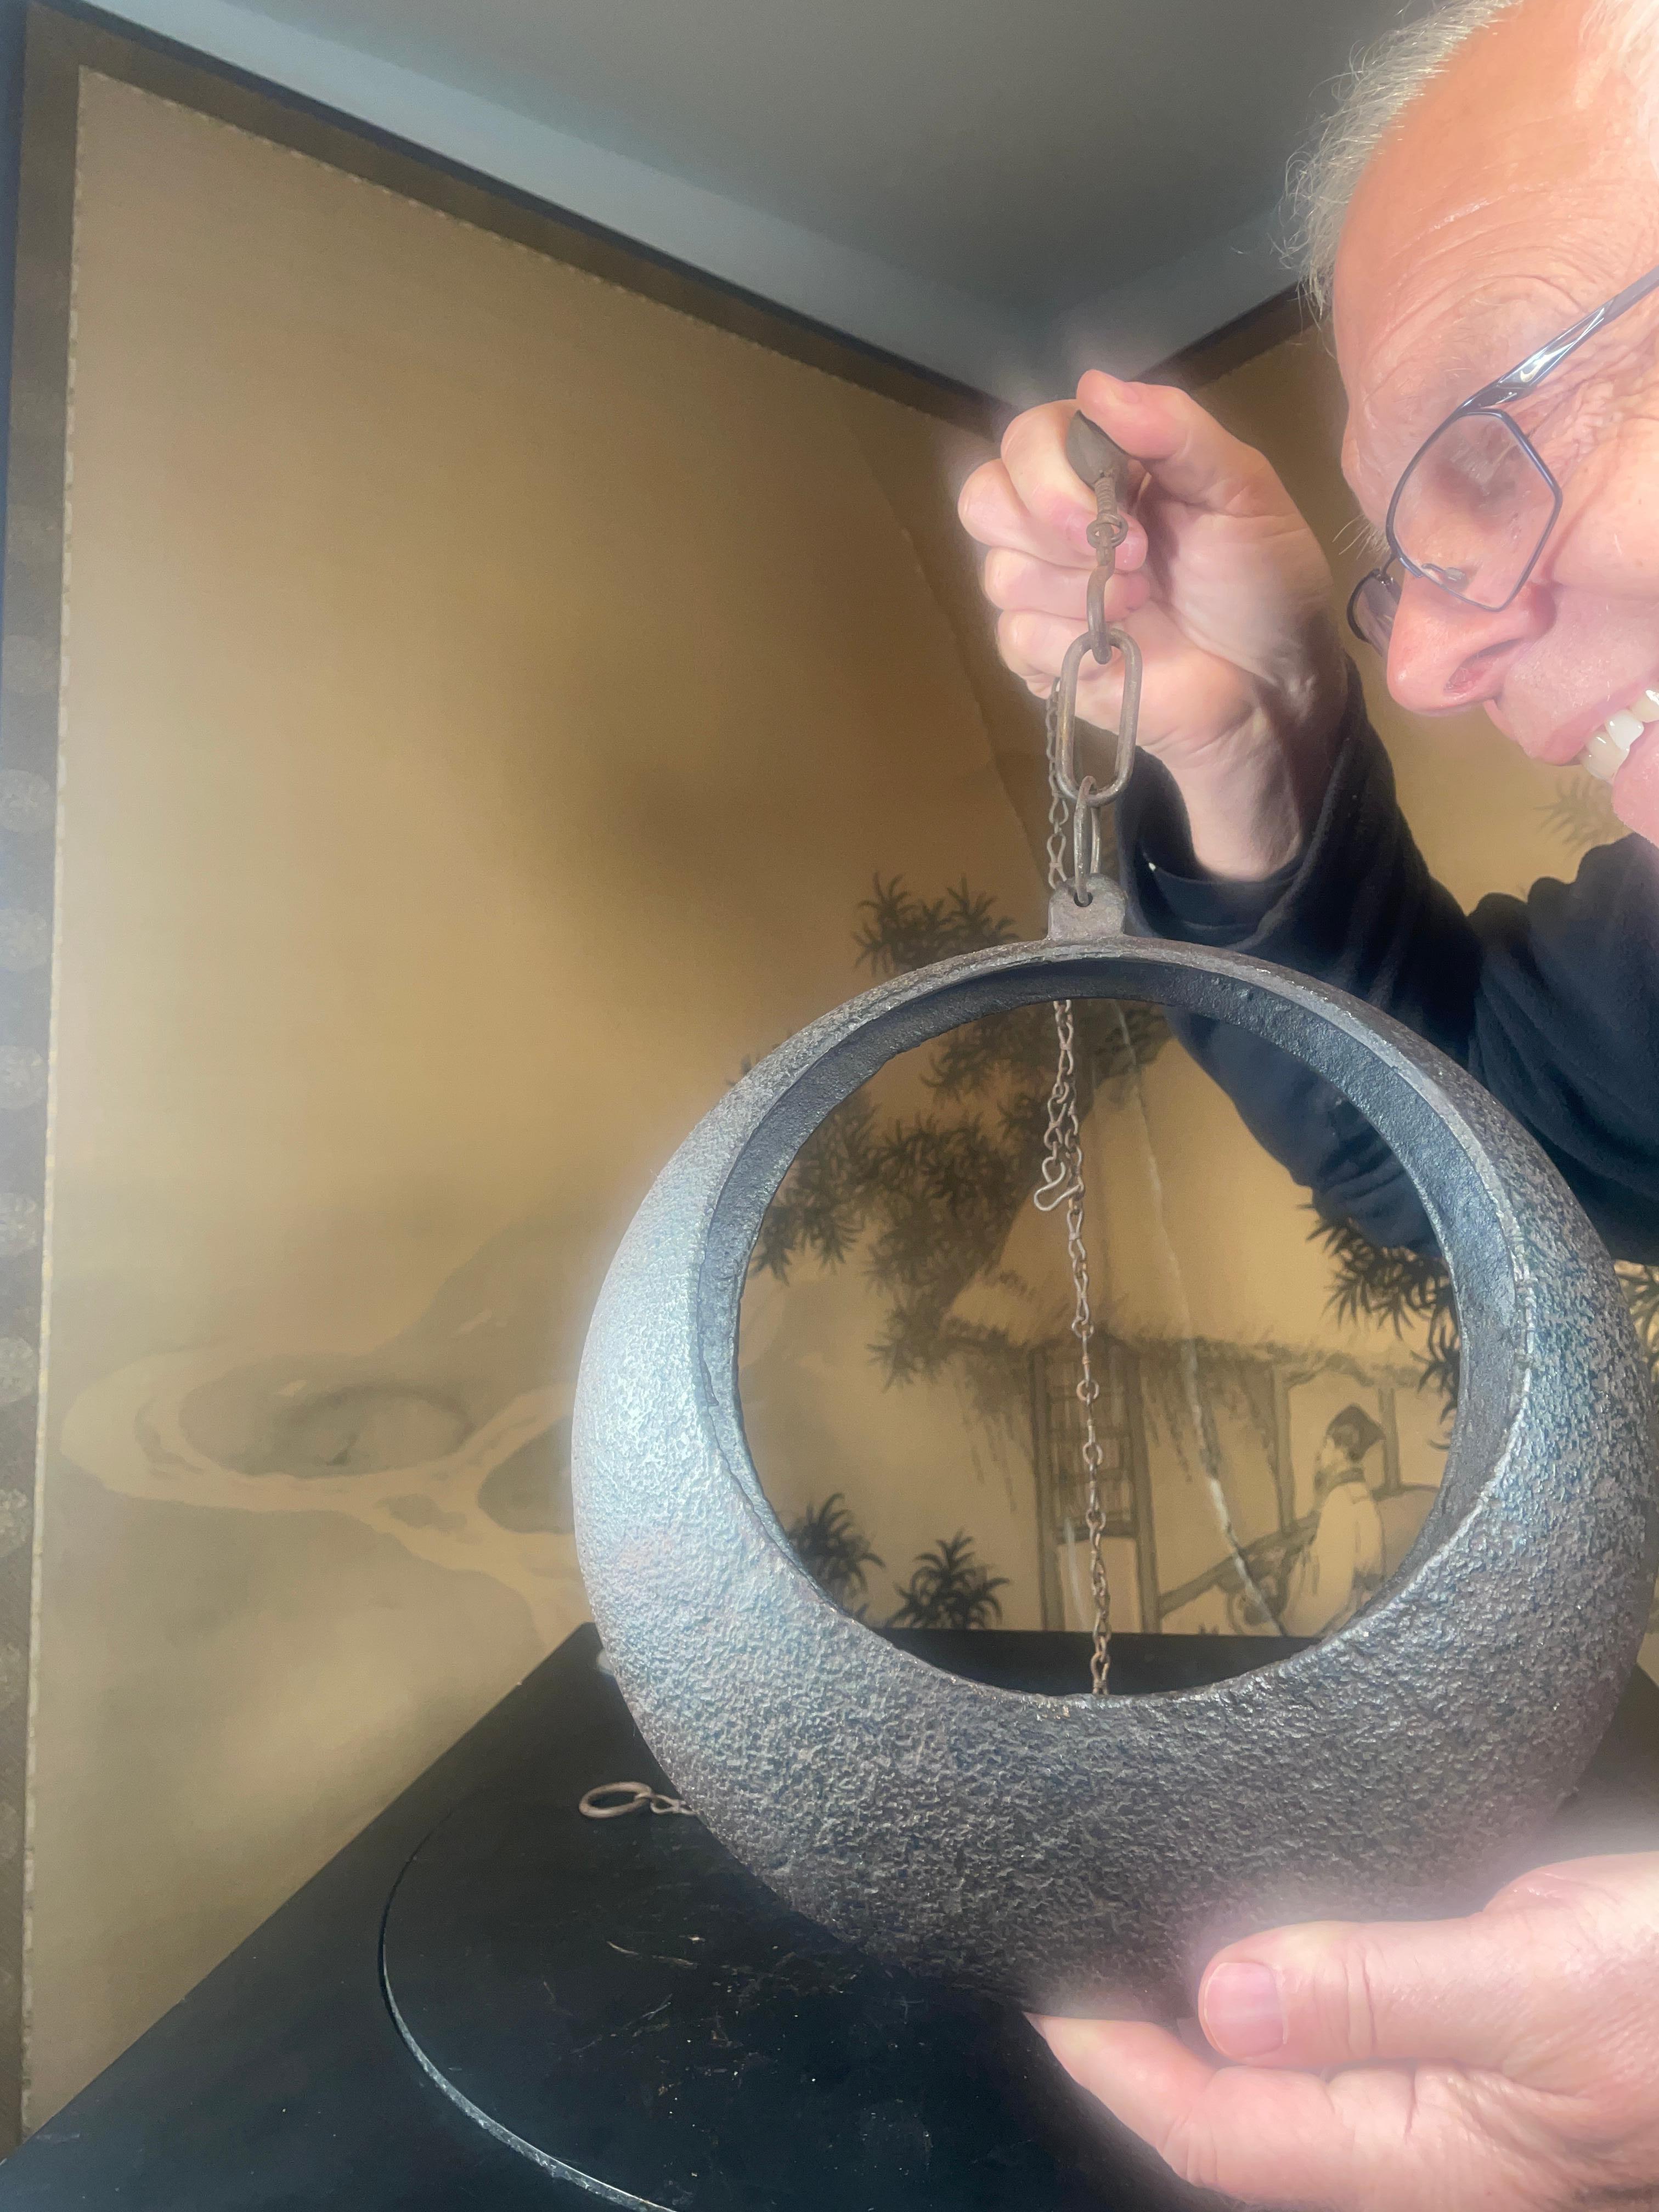 An impressive heavy, hand pounded vase including 52 inch antique iron chain, from our recent Japanese acquisitions

From Japan comes this big beautiful antique hand wrought 